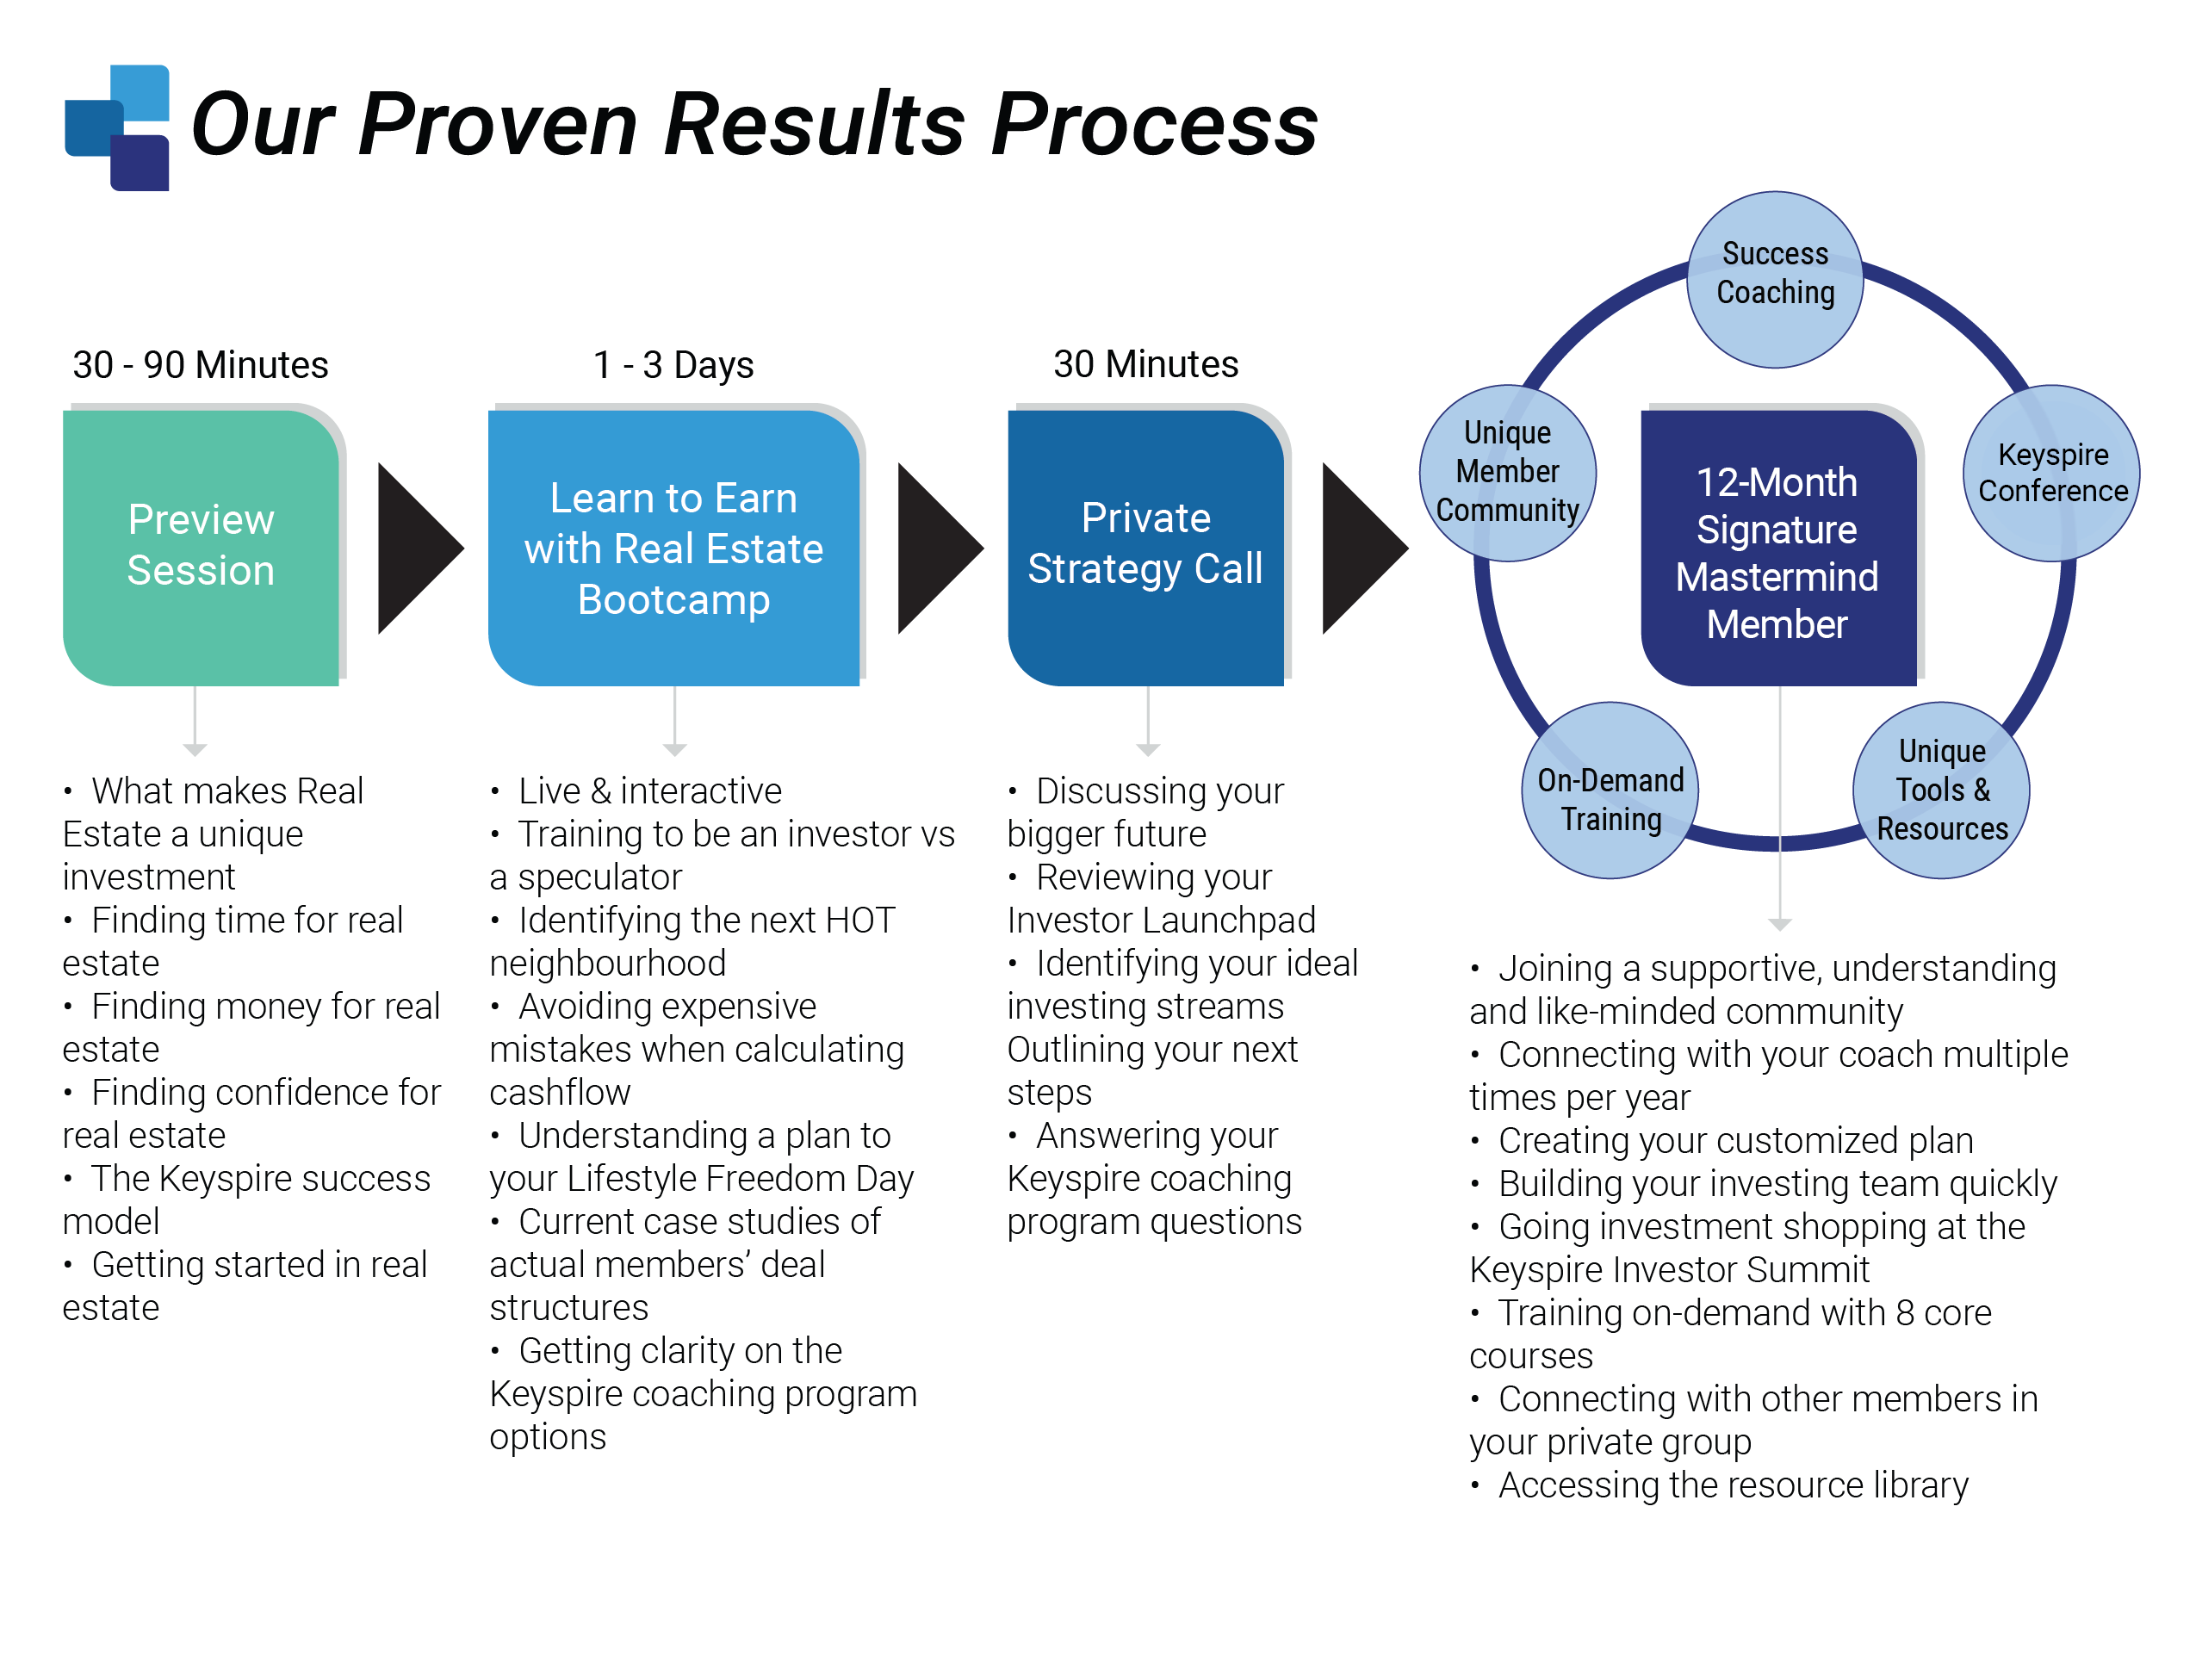 KS Proven Results Process-for Letter Page -v3